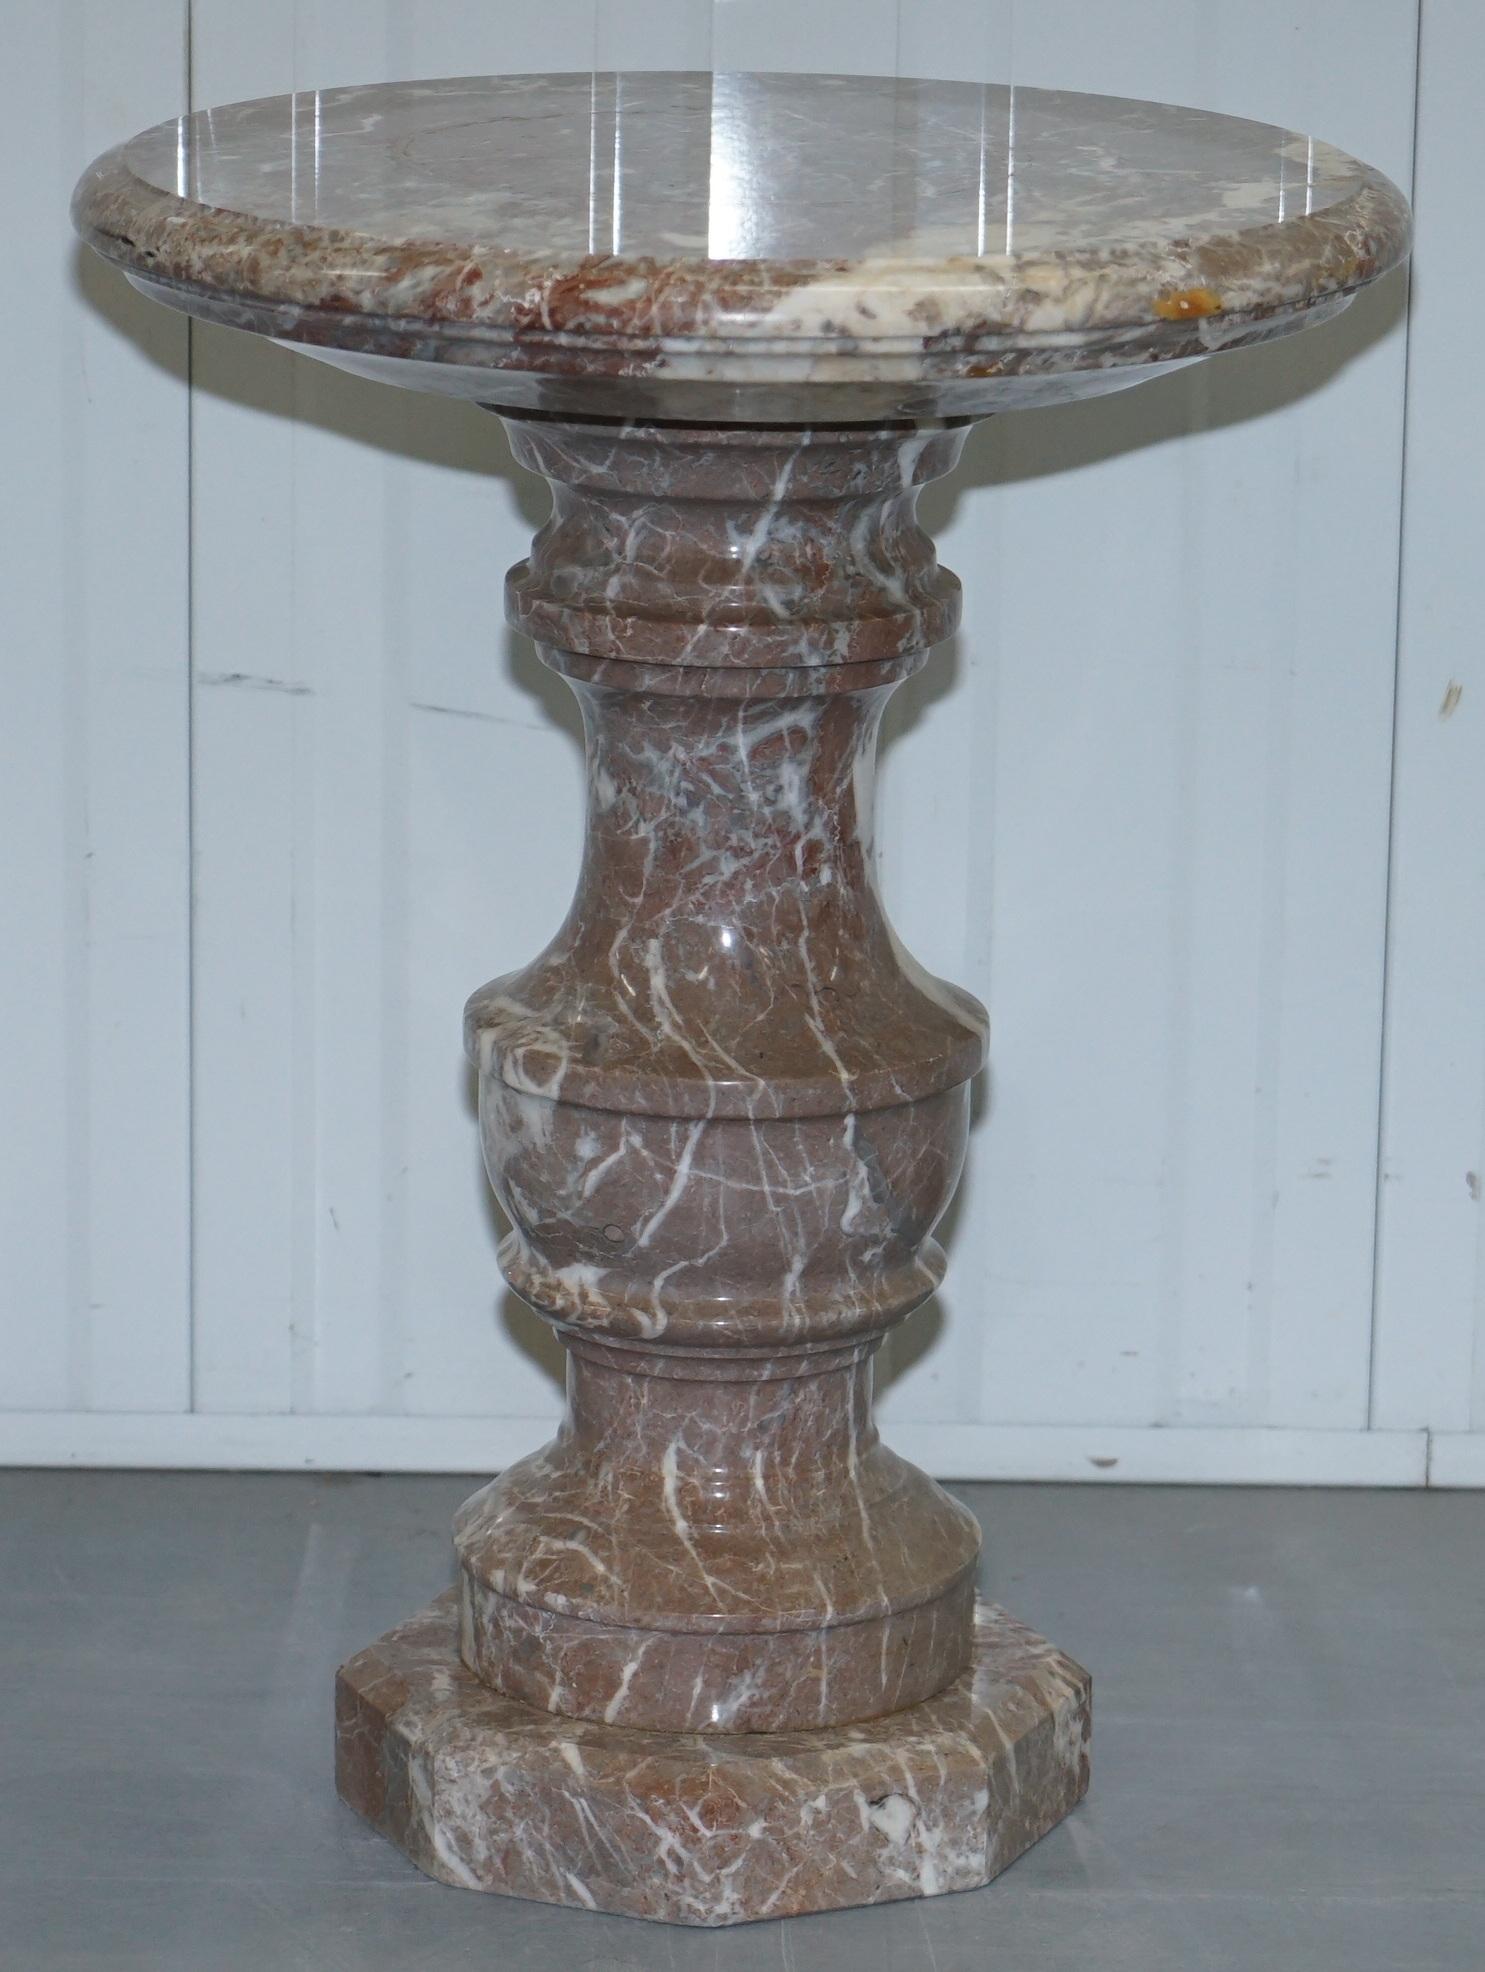 Wimbledon-Furniture is delighted to offer for sale this lovely large solid marble side end lamp wine table

Please note the delivery fee listed is just a guide, it covers within the M25 only, for an accurate quote please send me your postcode

I